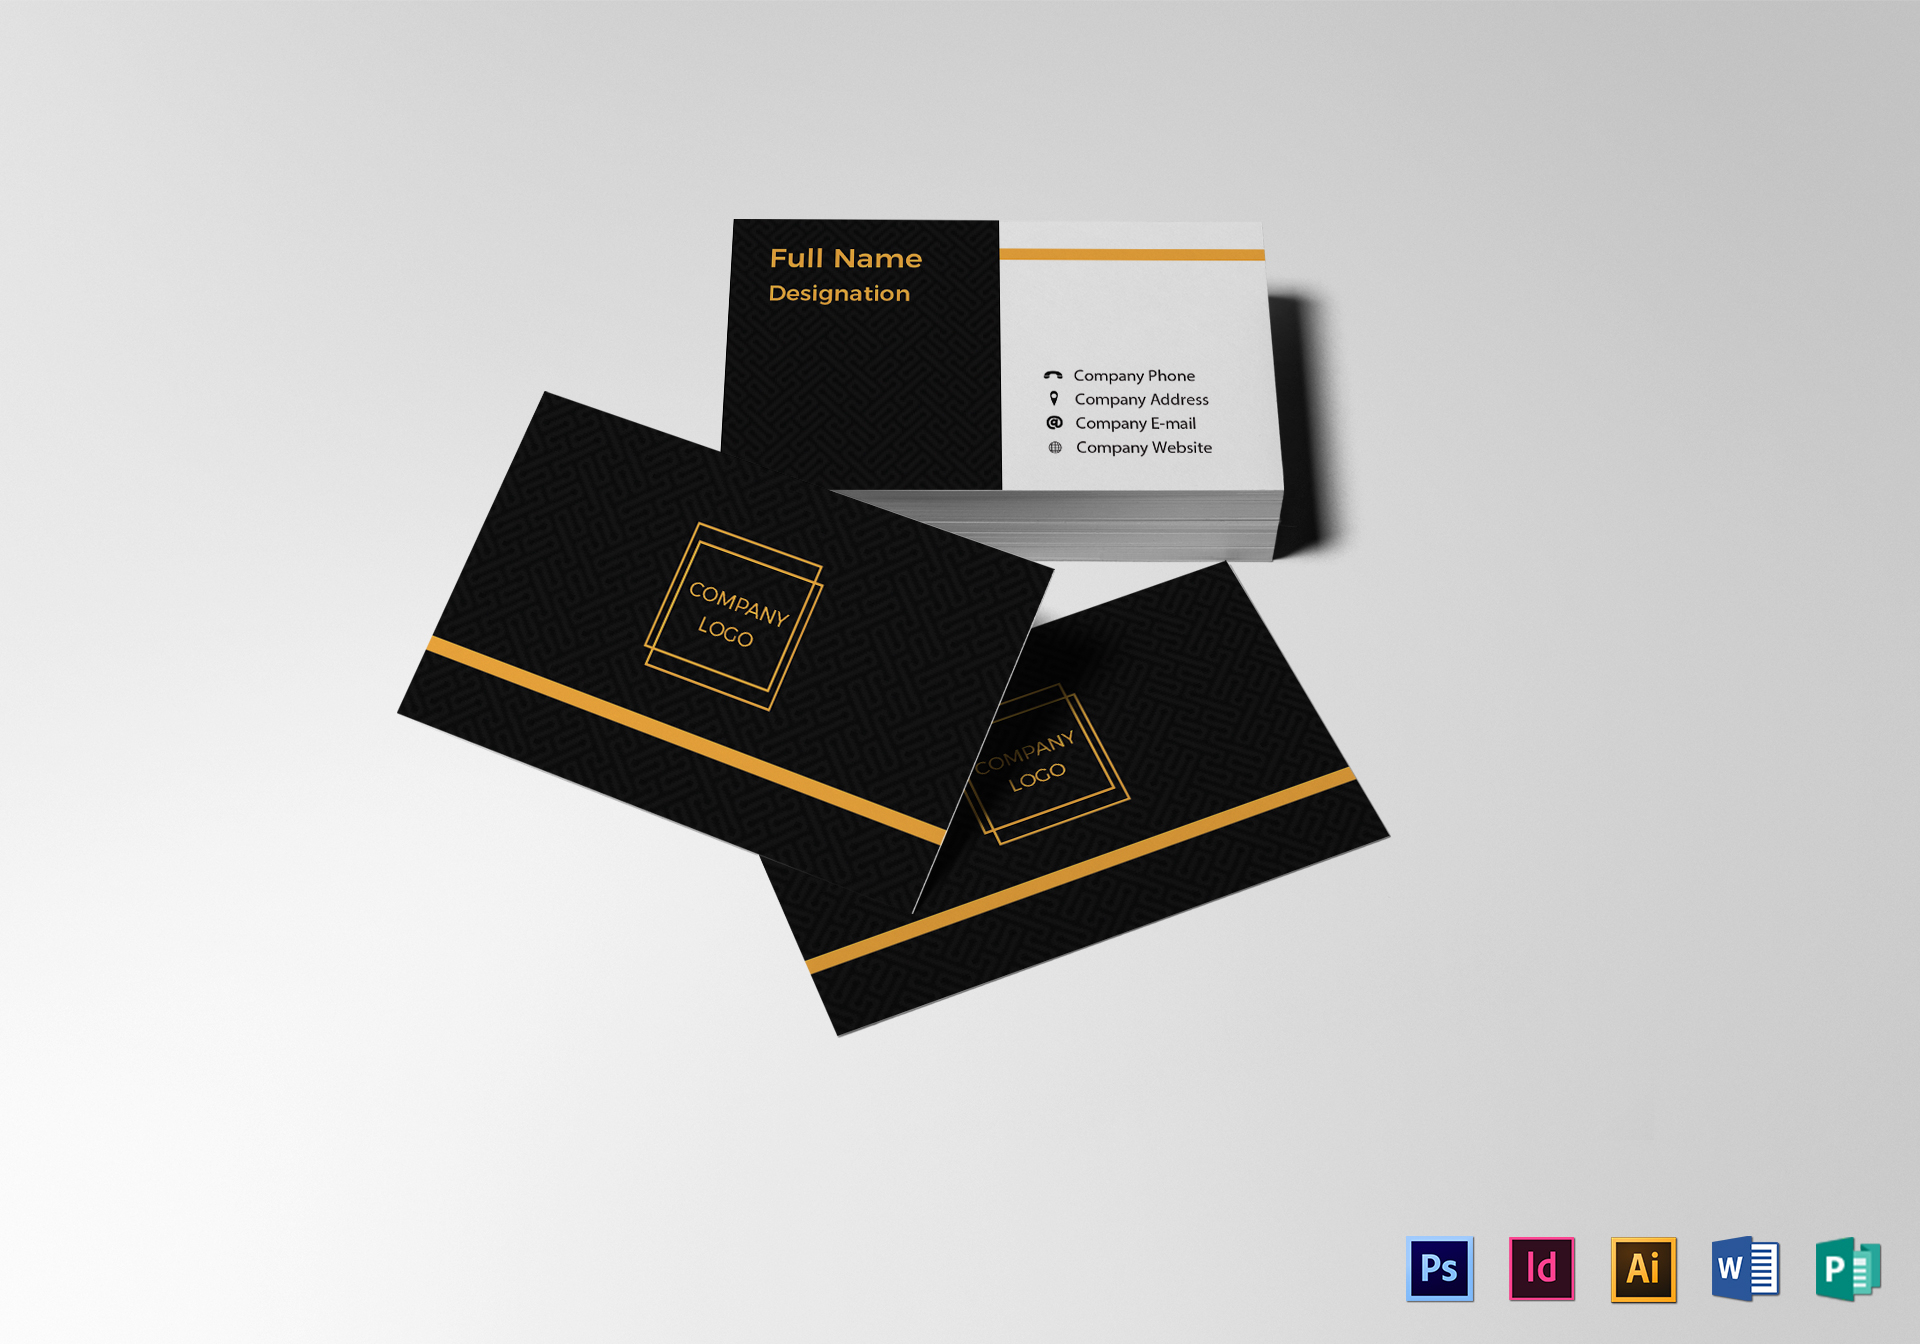 003 Blank Business Card Template Psd Remarkable Ideas Free Pertaining To Download Visiting Card Templates